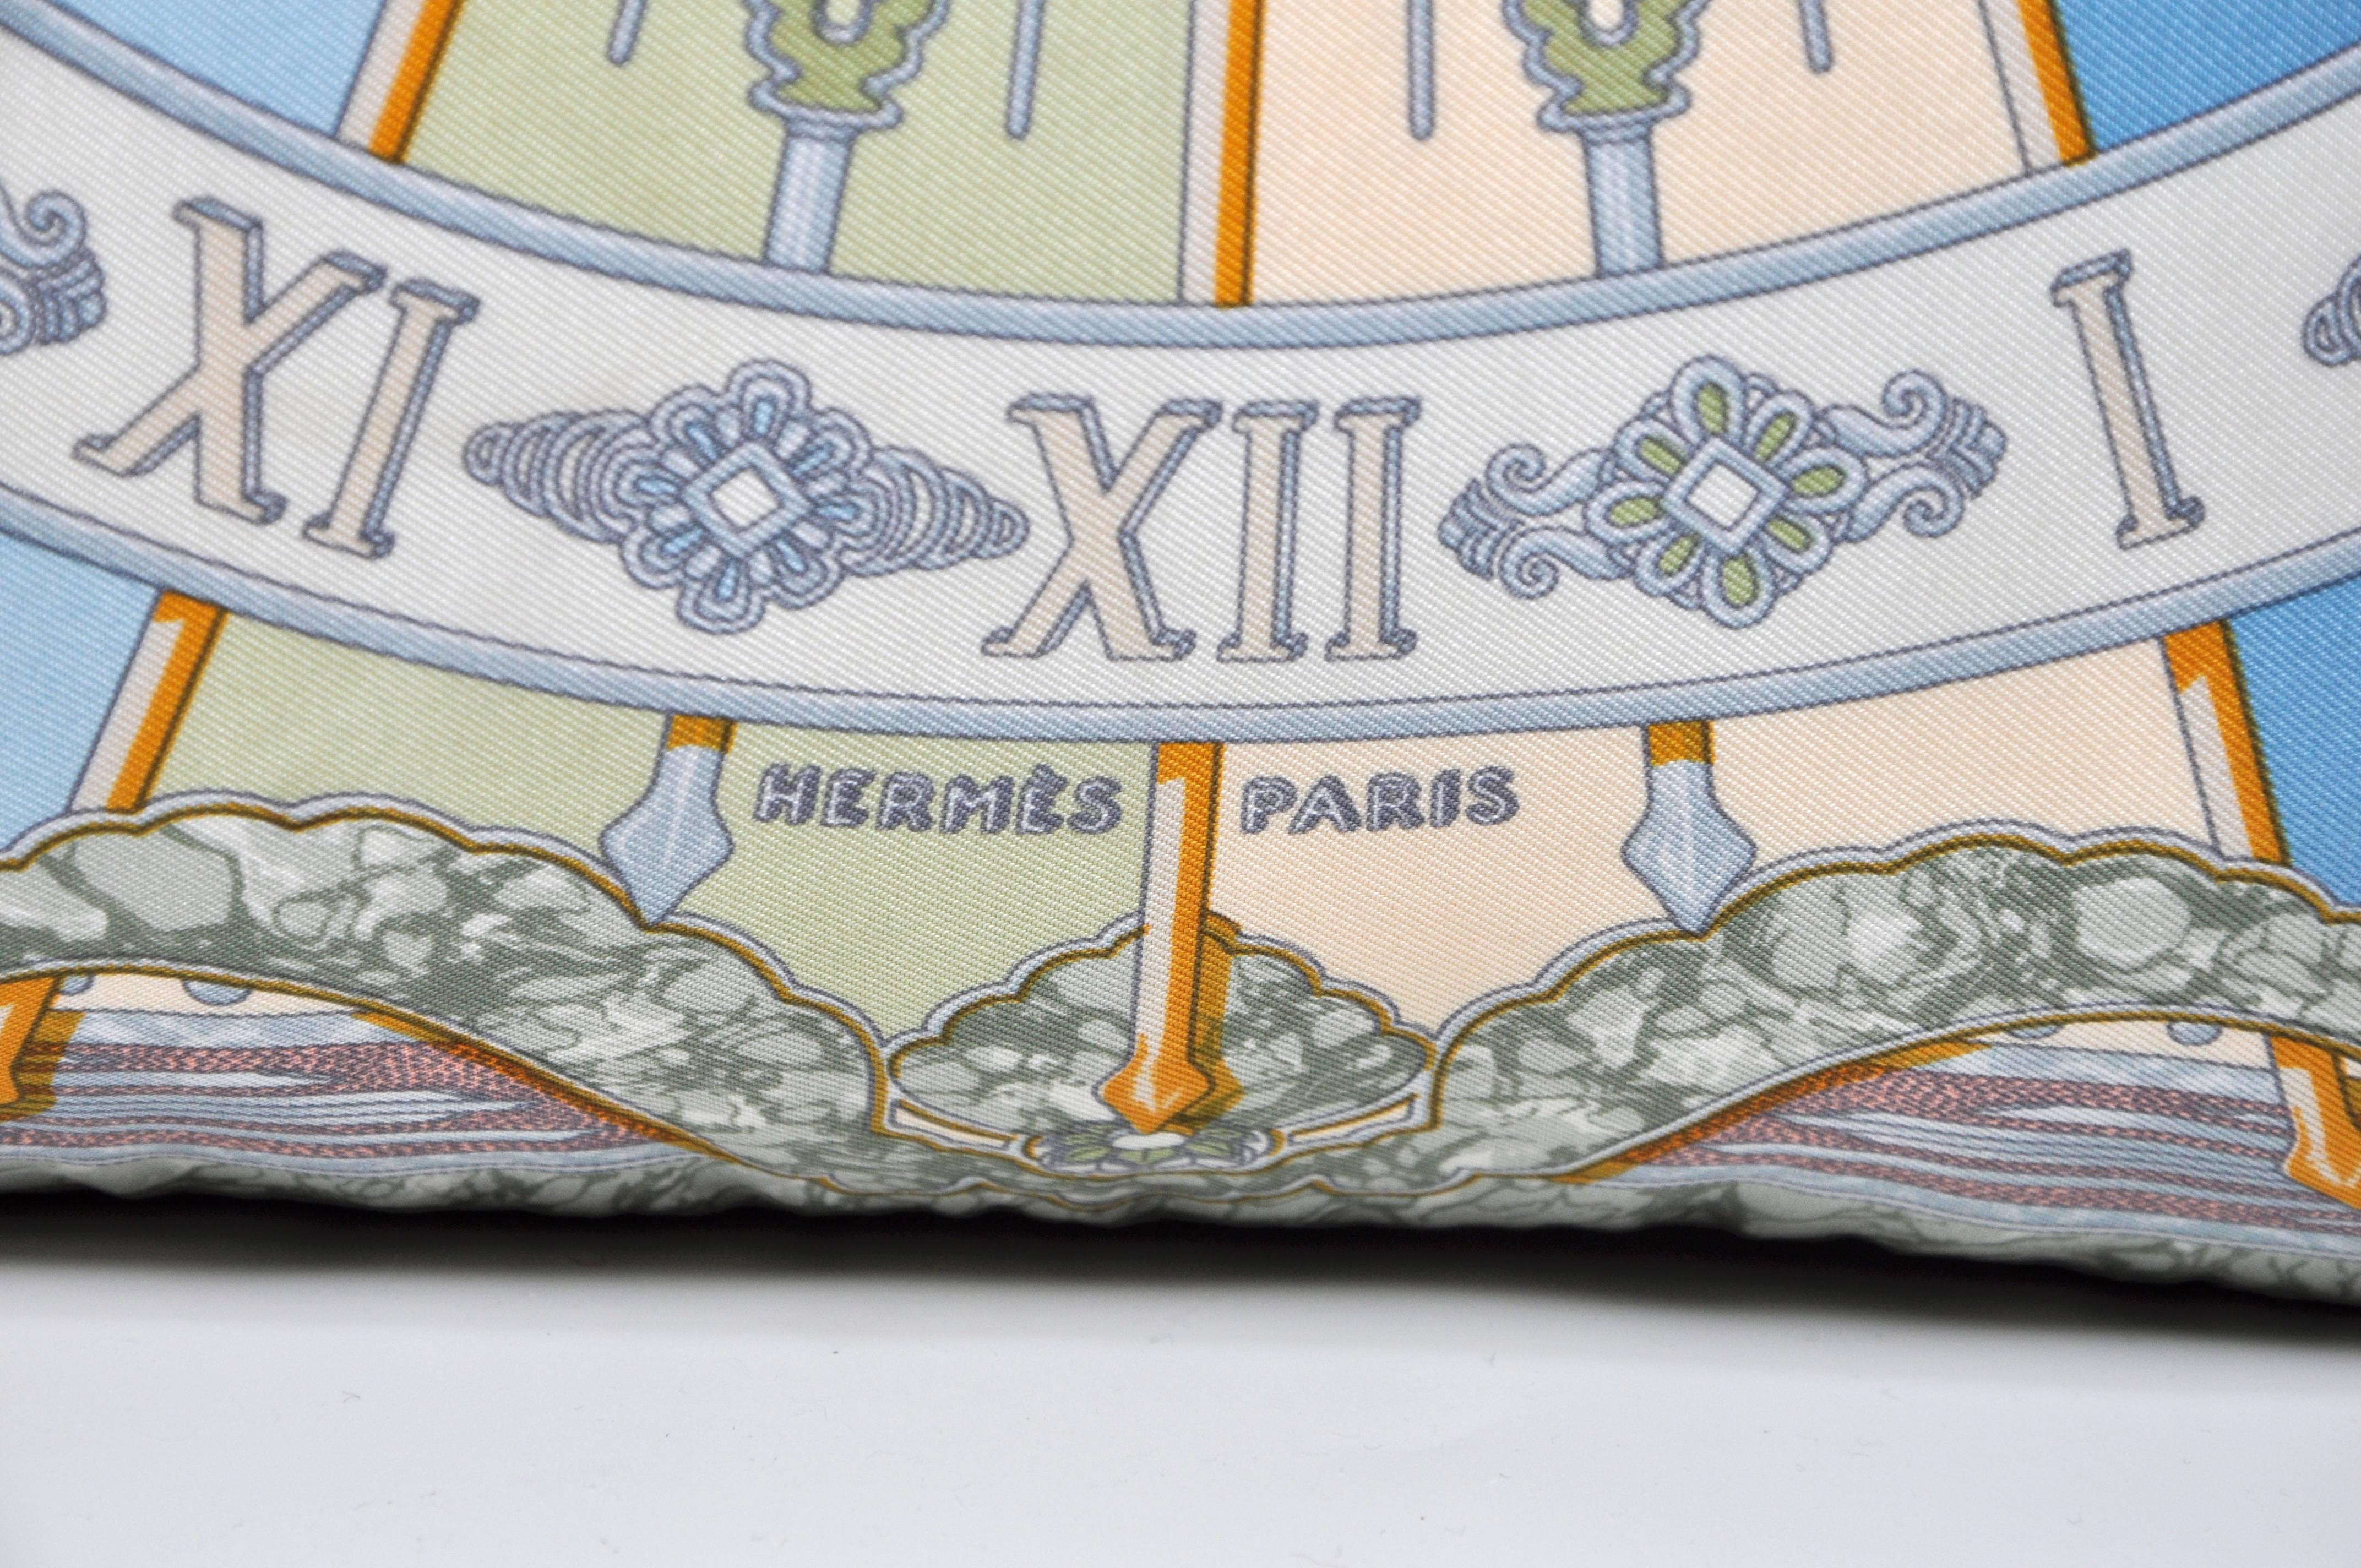 The ‘crème de la crème’ of scarves, this beauty is a one-of-a-kind custom-made luxury cushion (pillow) from an exquisite vintage silk celestial themed Hermes fashion scarf designed by Joachim Metz in 1994. Originally named as ‘Gloria Soli’, the